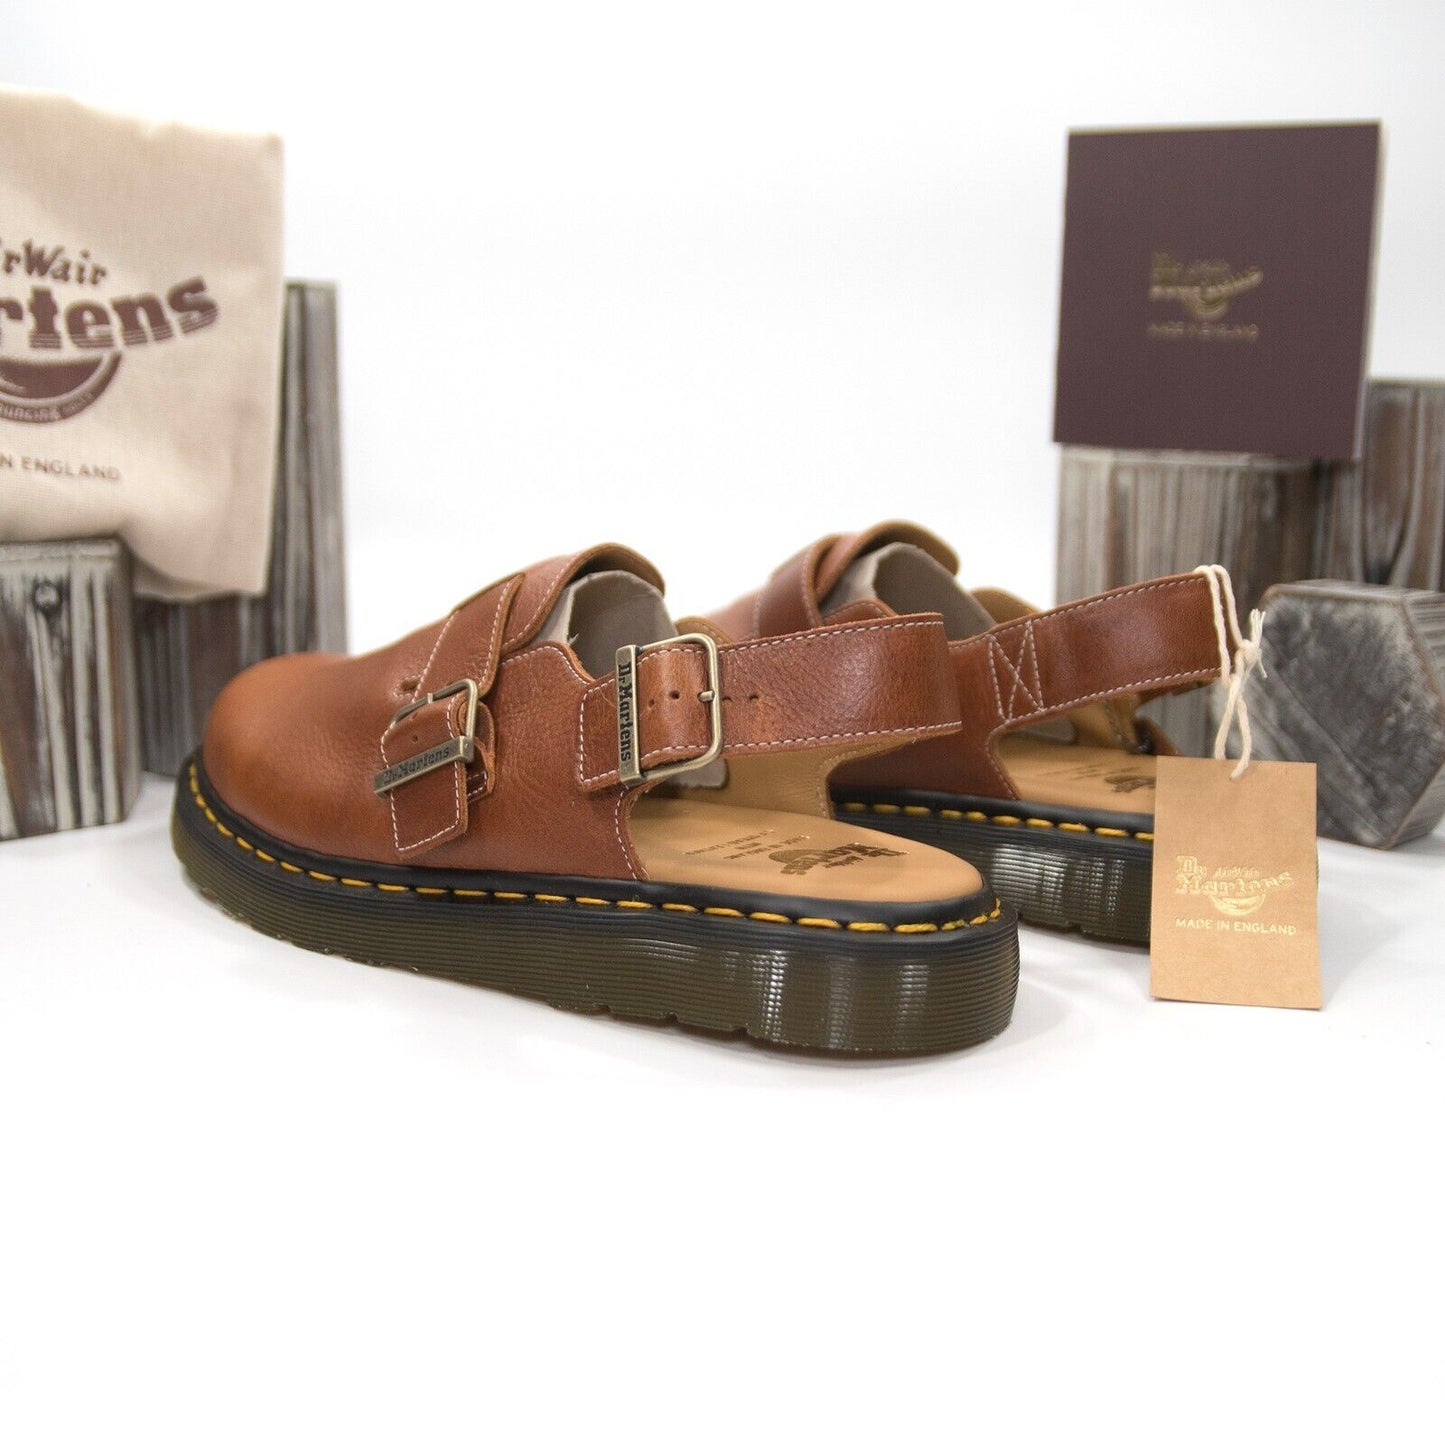 Dr. Martens Made In England Jorge Heritage Tan Leather Mules Sandals Mens 12 NIB